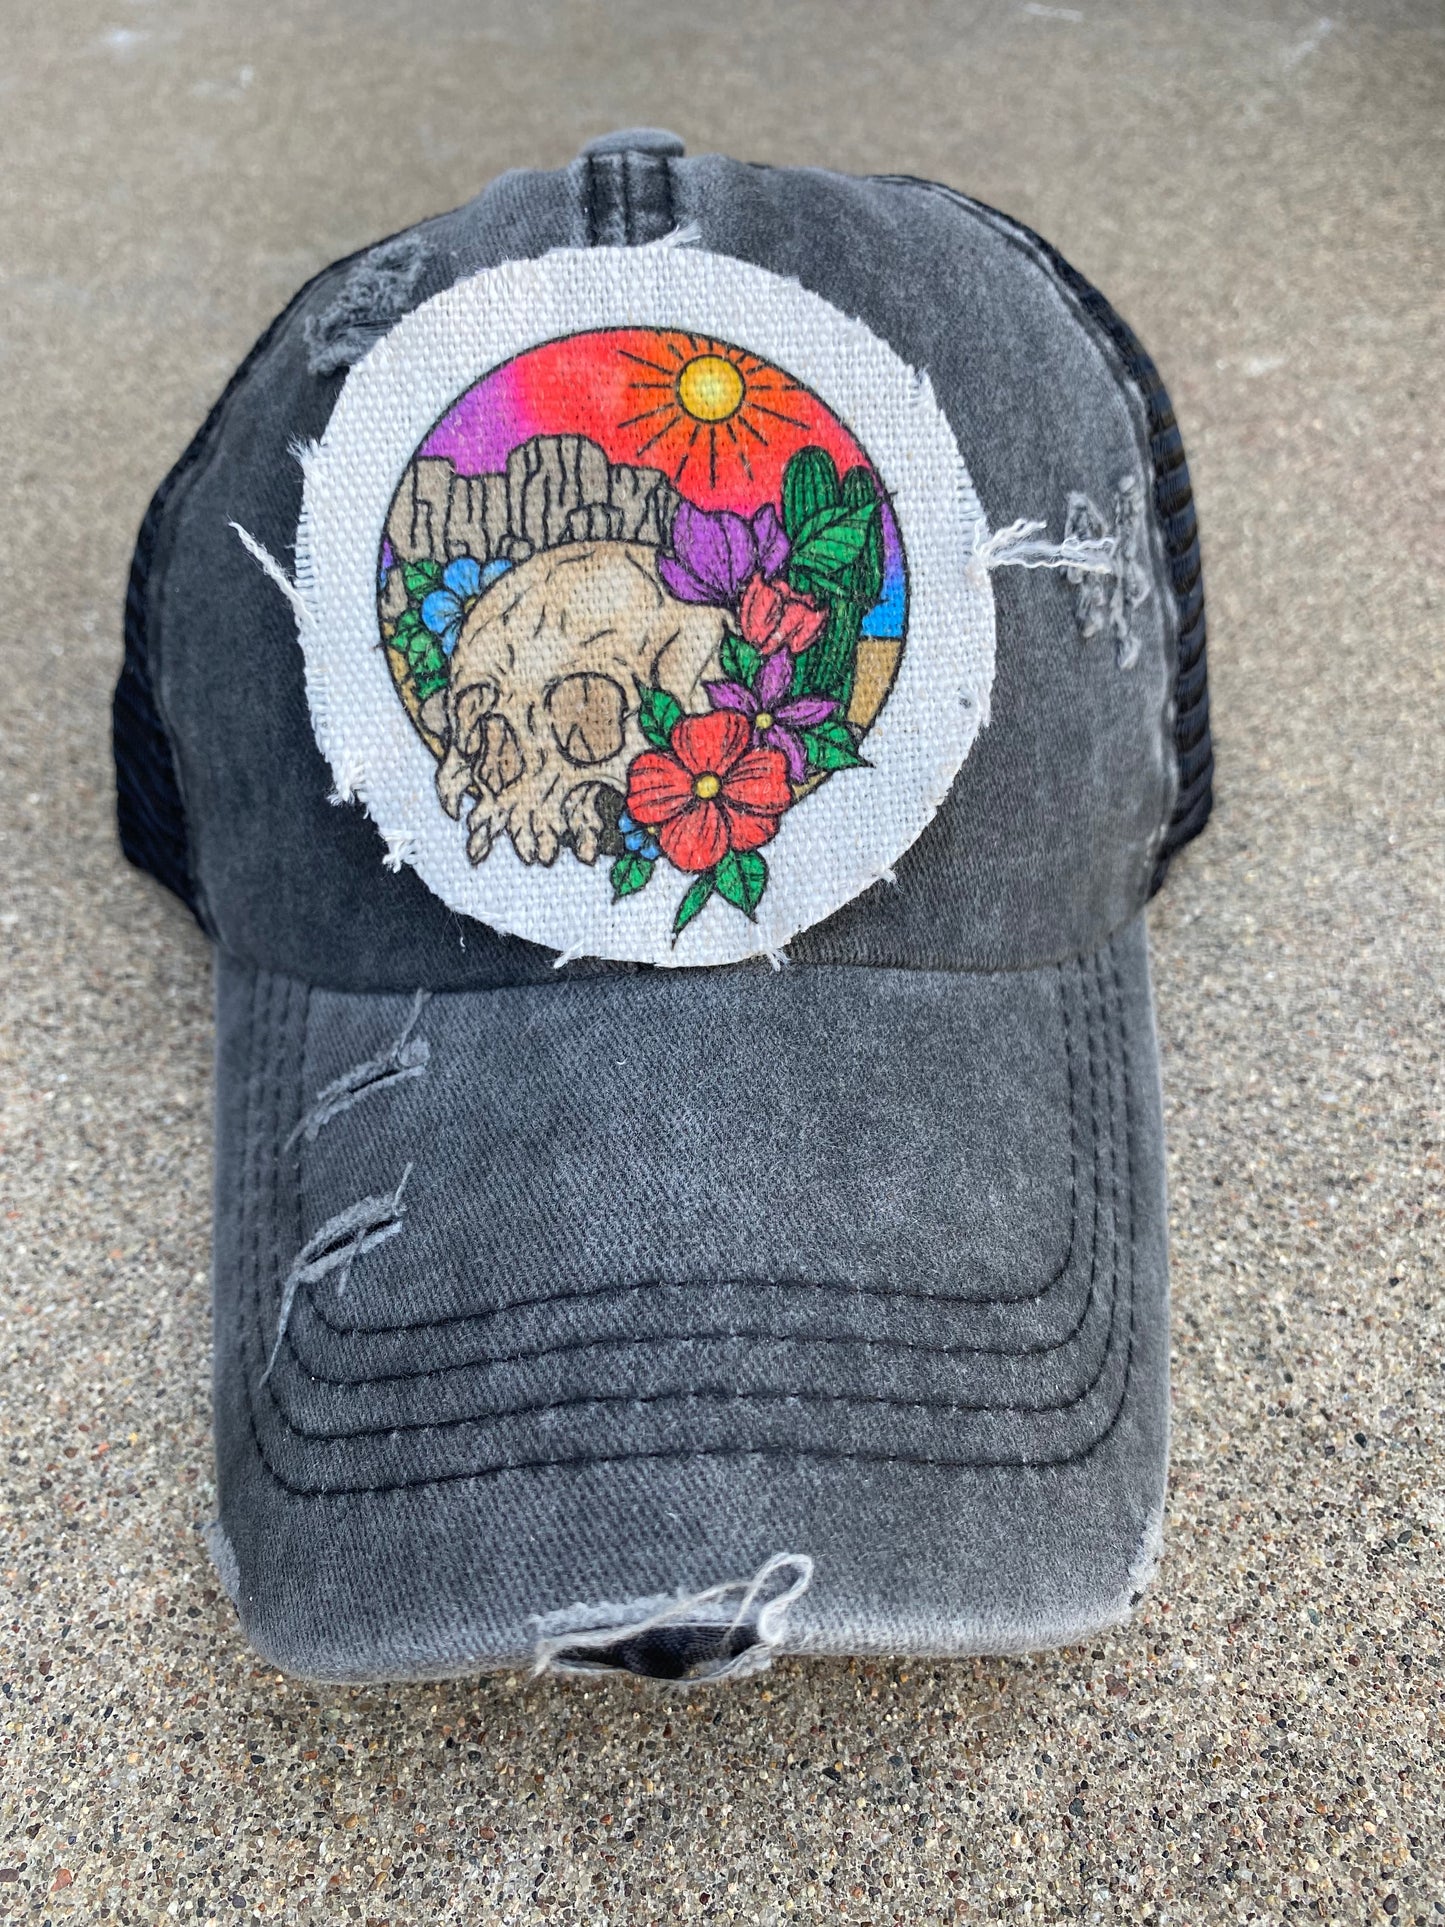 Desert with Skull Circle Hat Patch